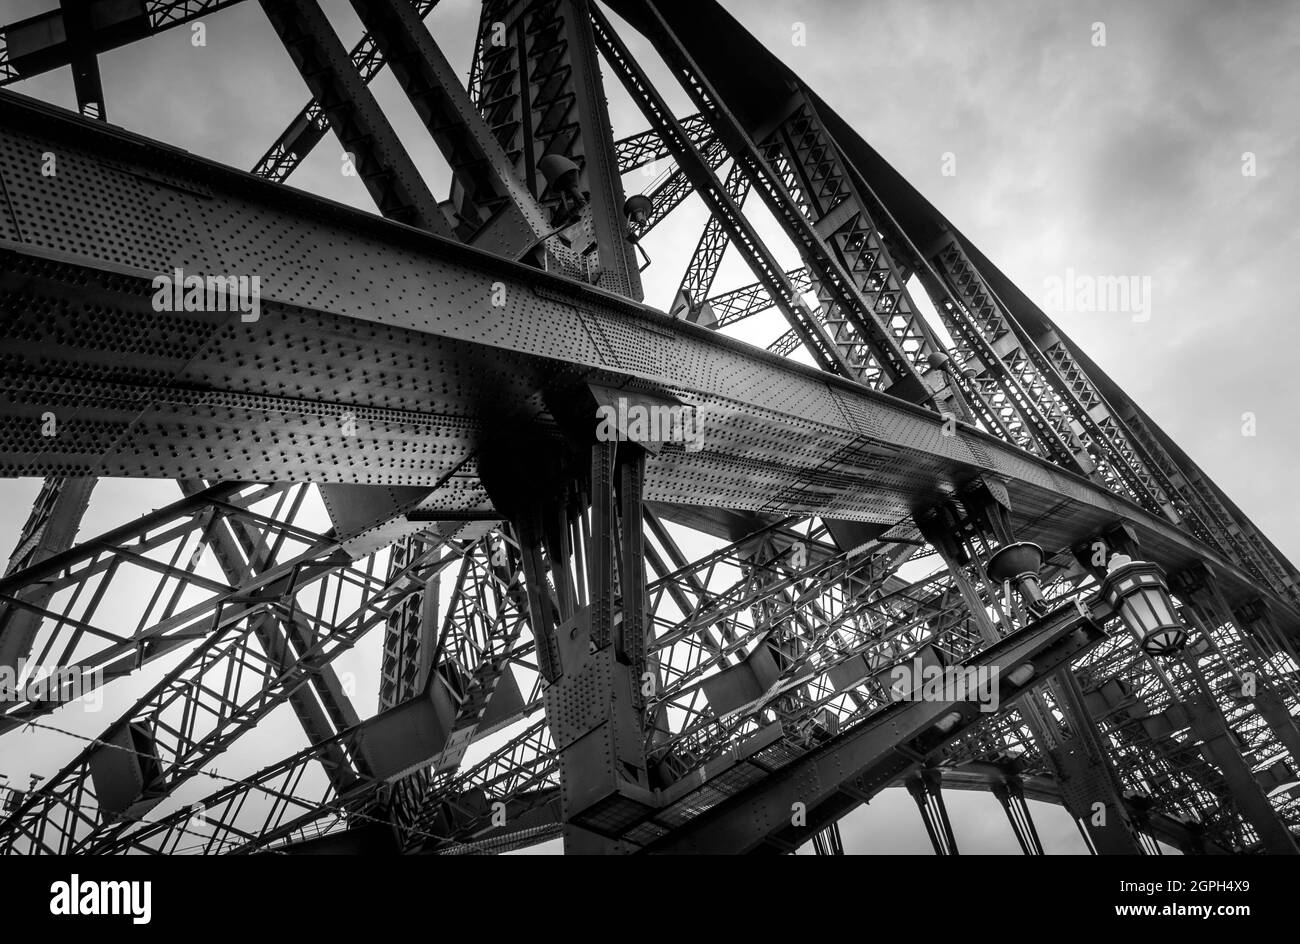 Black and white image of detail on the Sydney harbour bridge showing structure with rivets. No people. Stock Photo